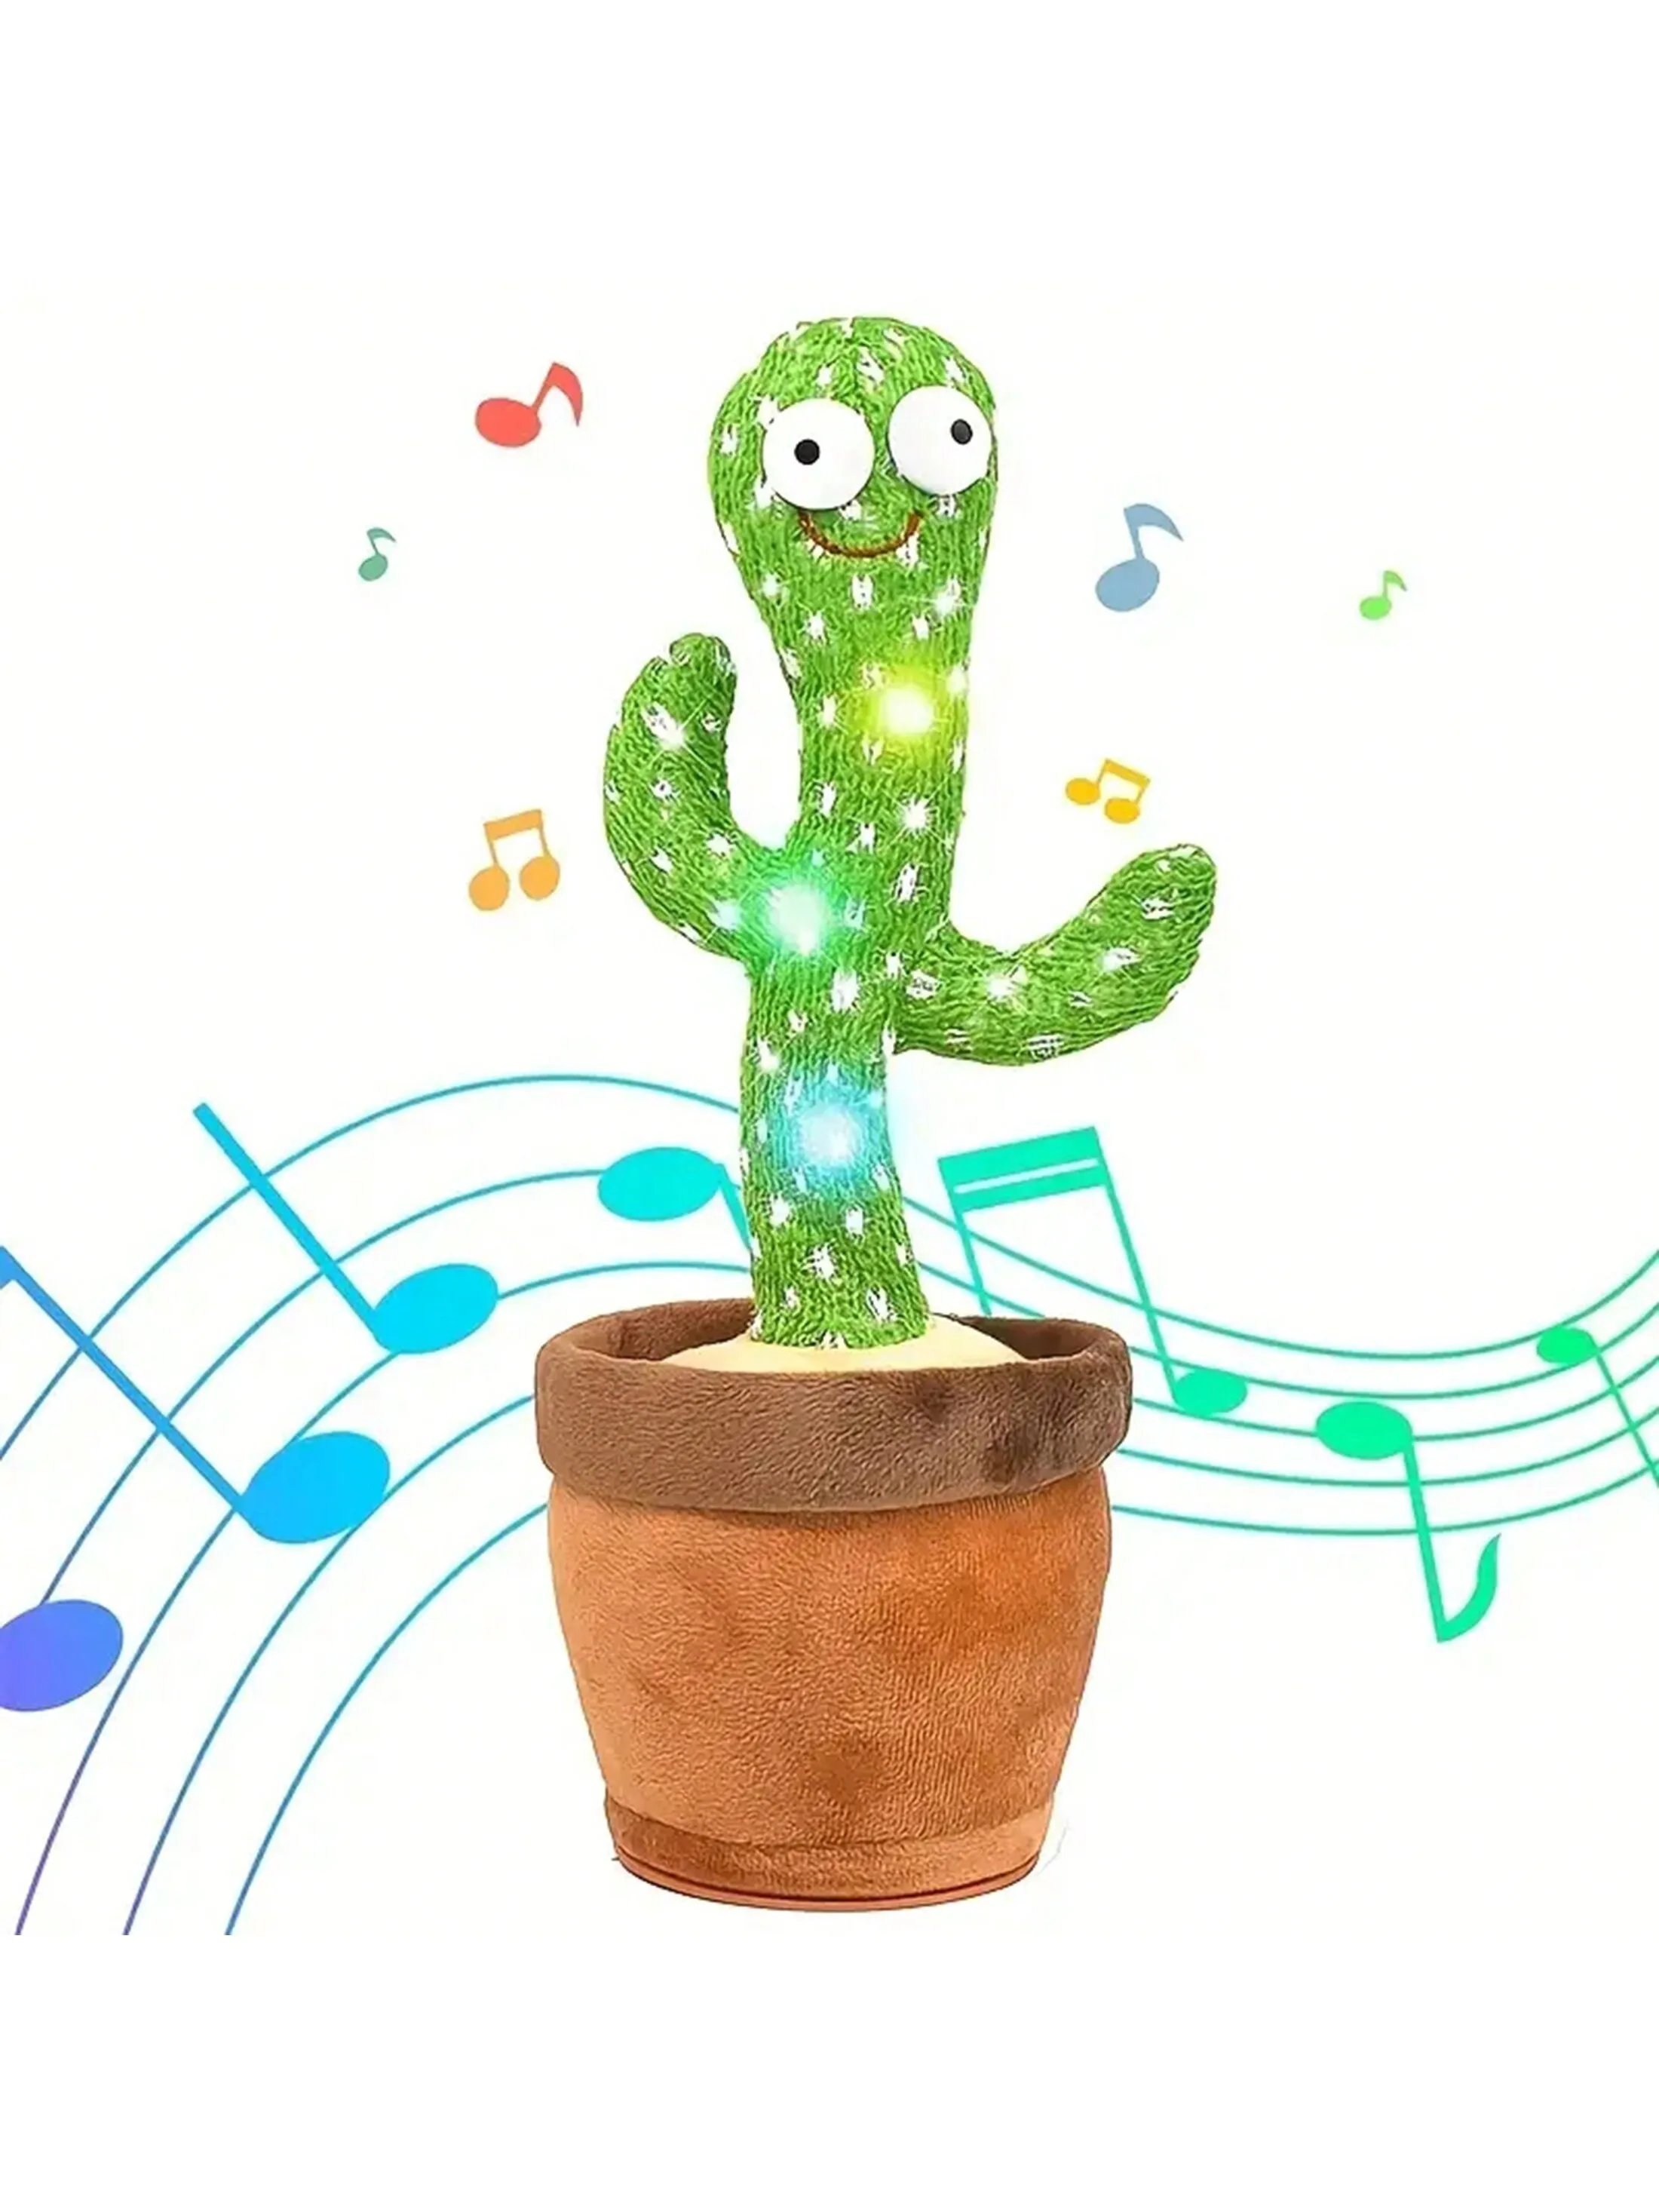 

Funny Repeat Talking Cactus Music Plant Toys USB Battery Speak Electronic Dancing Singing Plush Toys for Kids